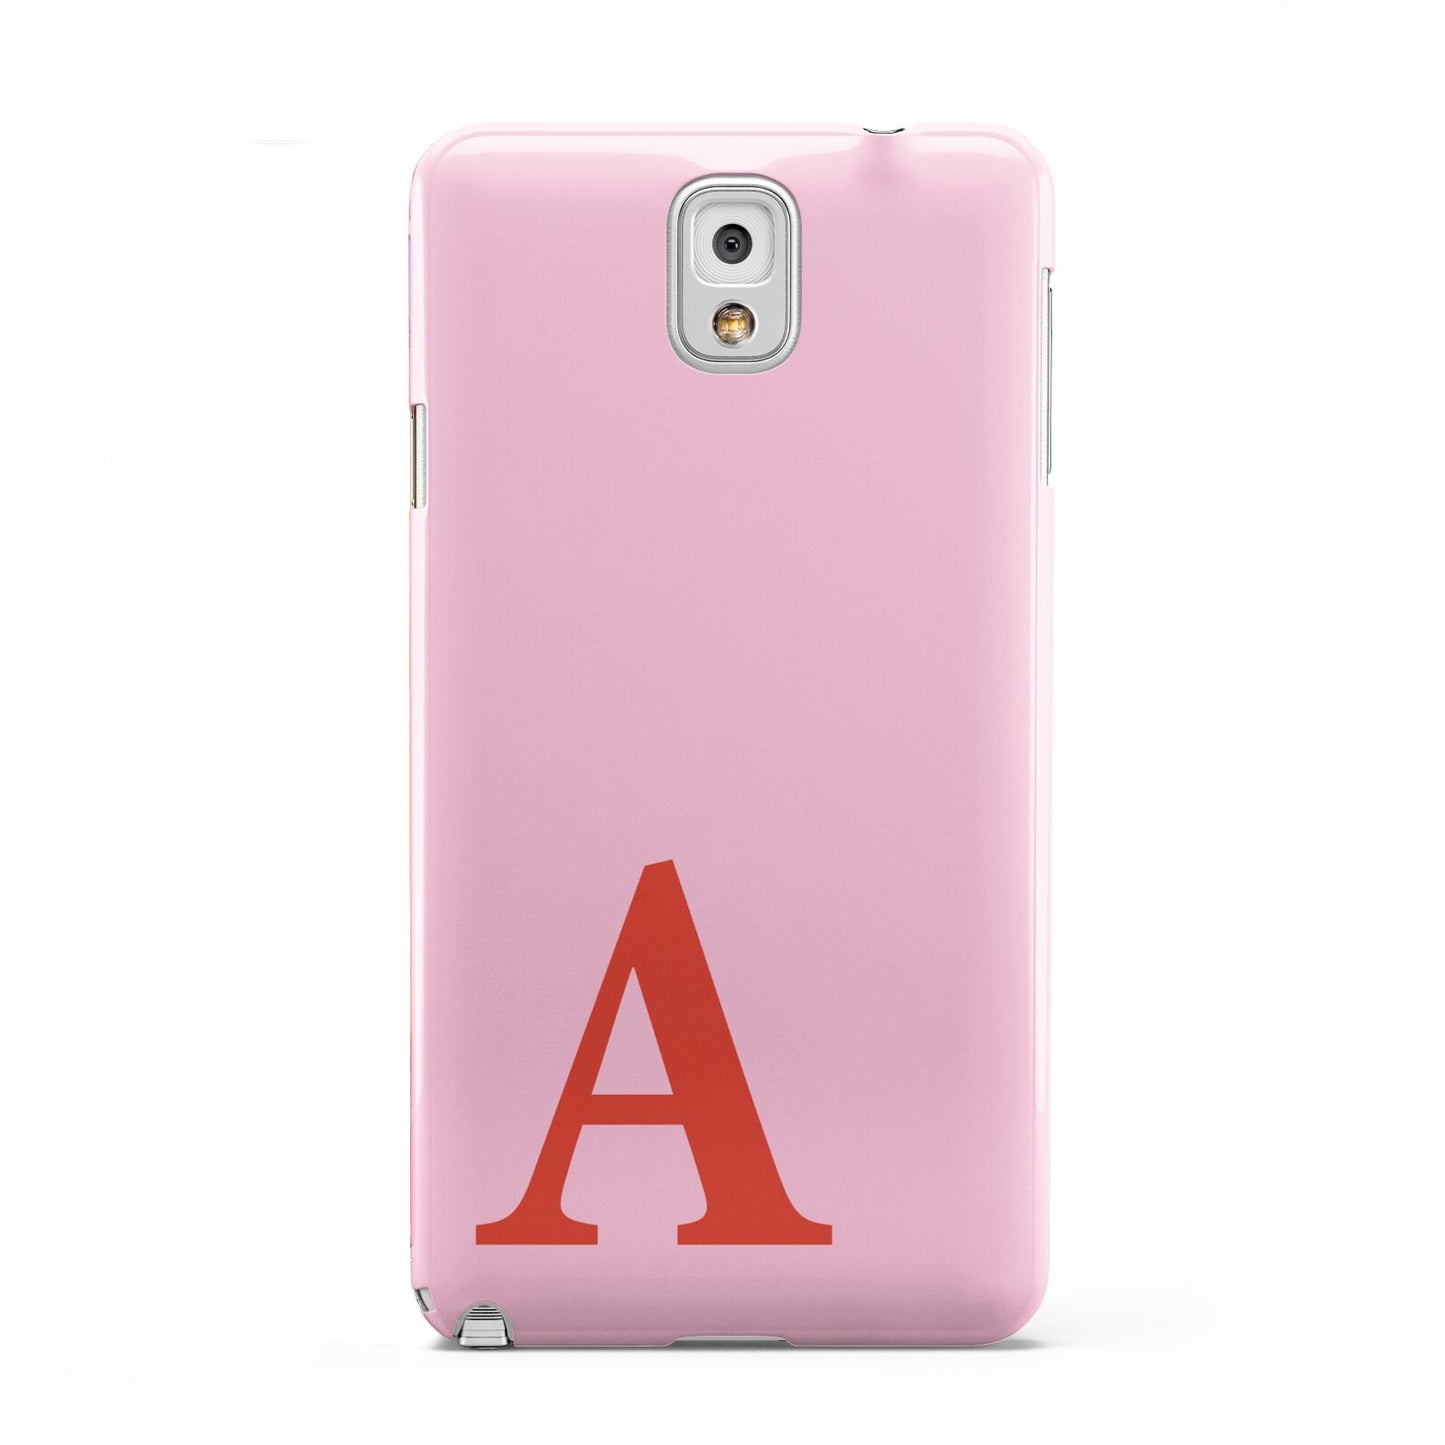 Personalised Pink and Red Samsung Galaxy Note 3 Case